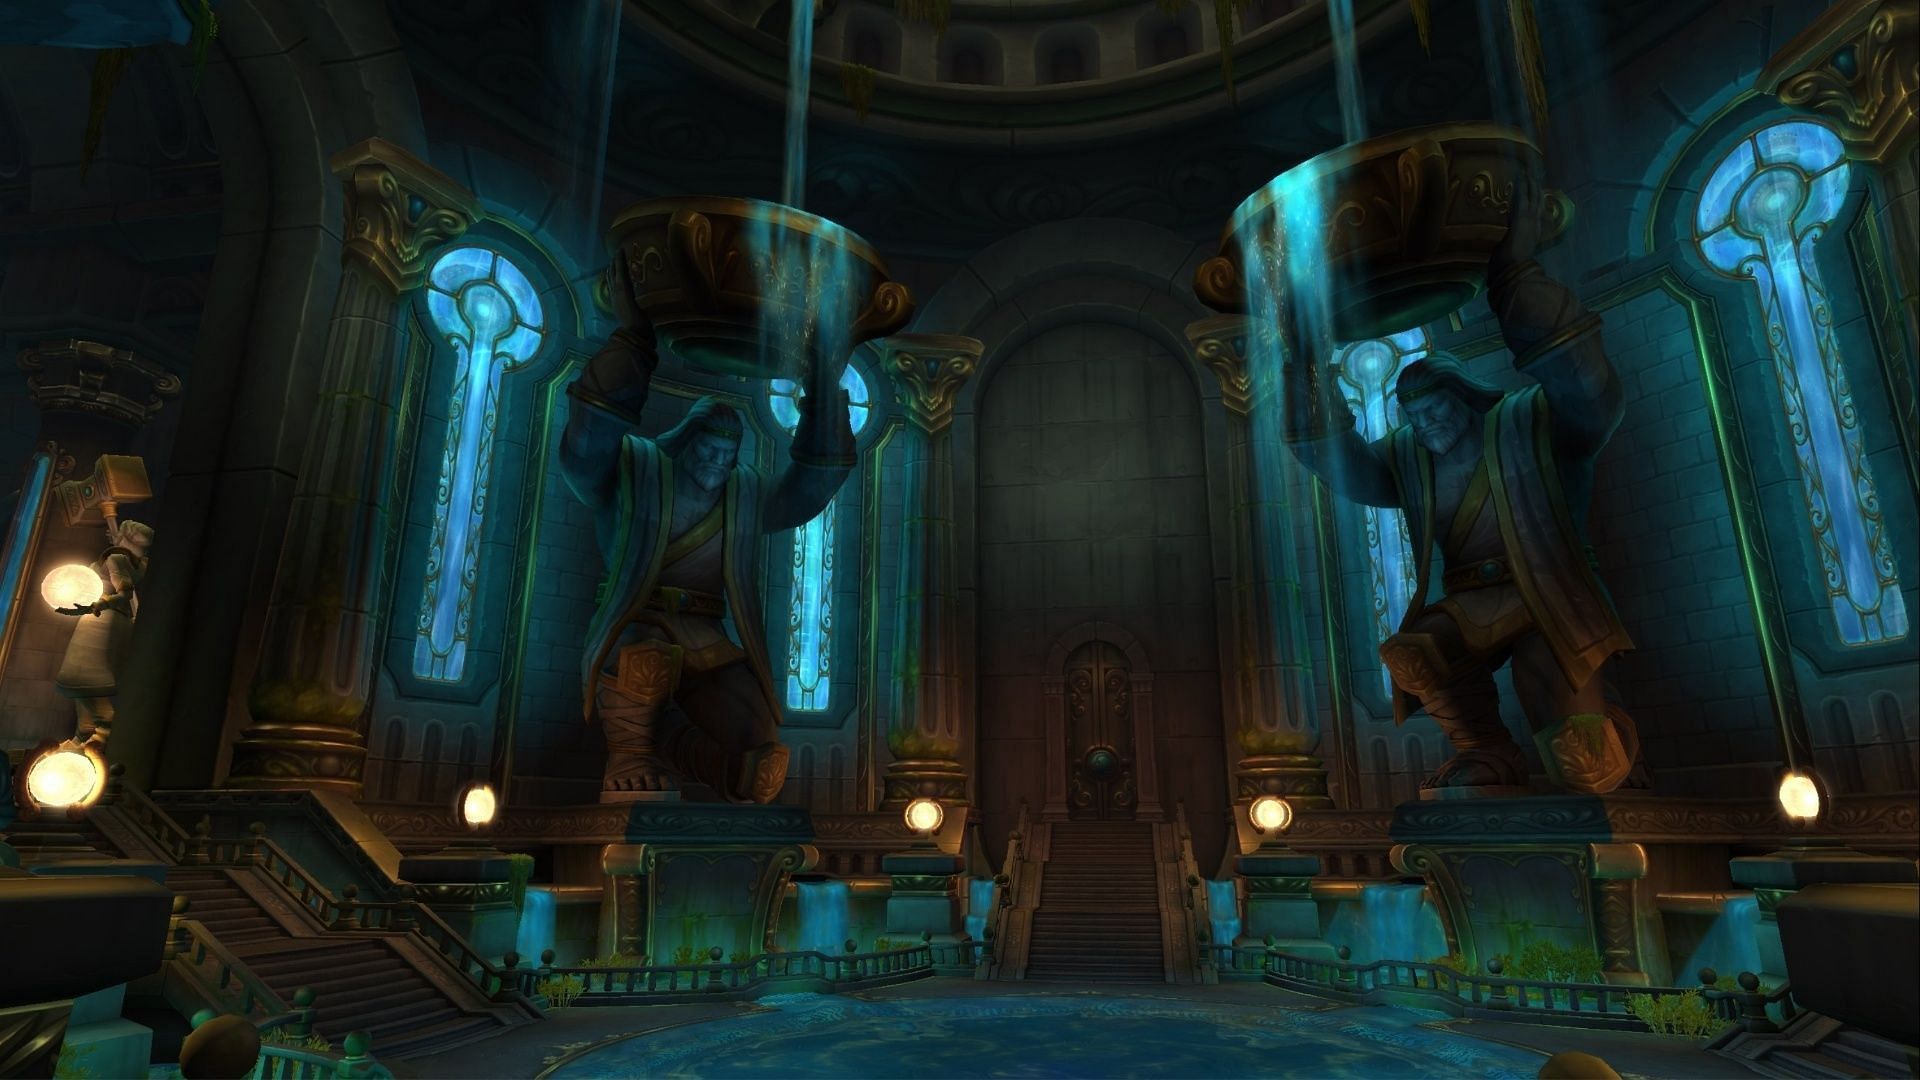 Halls of Infusion: World of Warcraft: Dragonflight's Halls of Infusion Dragon Gauntlet skip is still possible post-hotfix